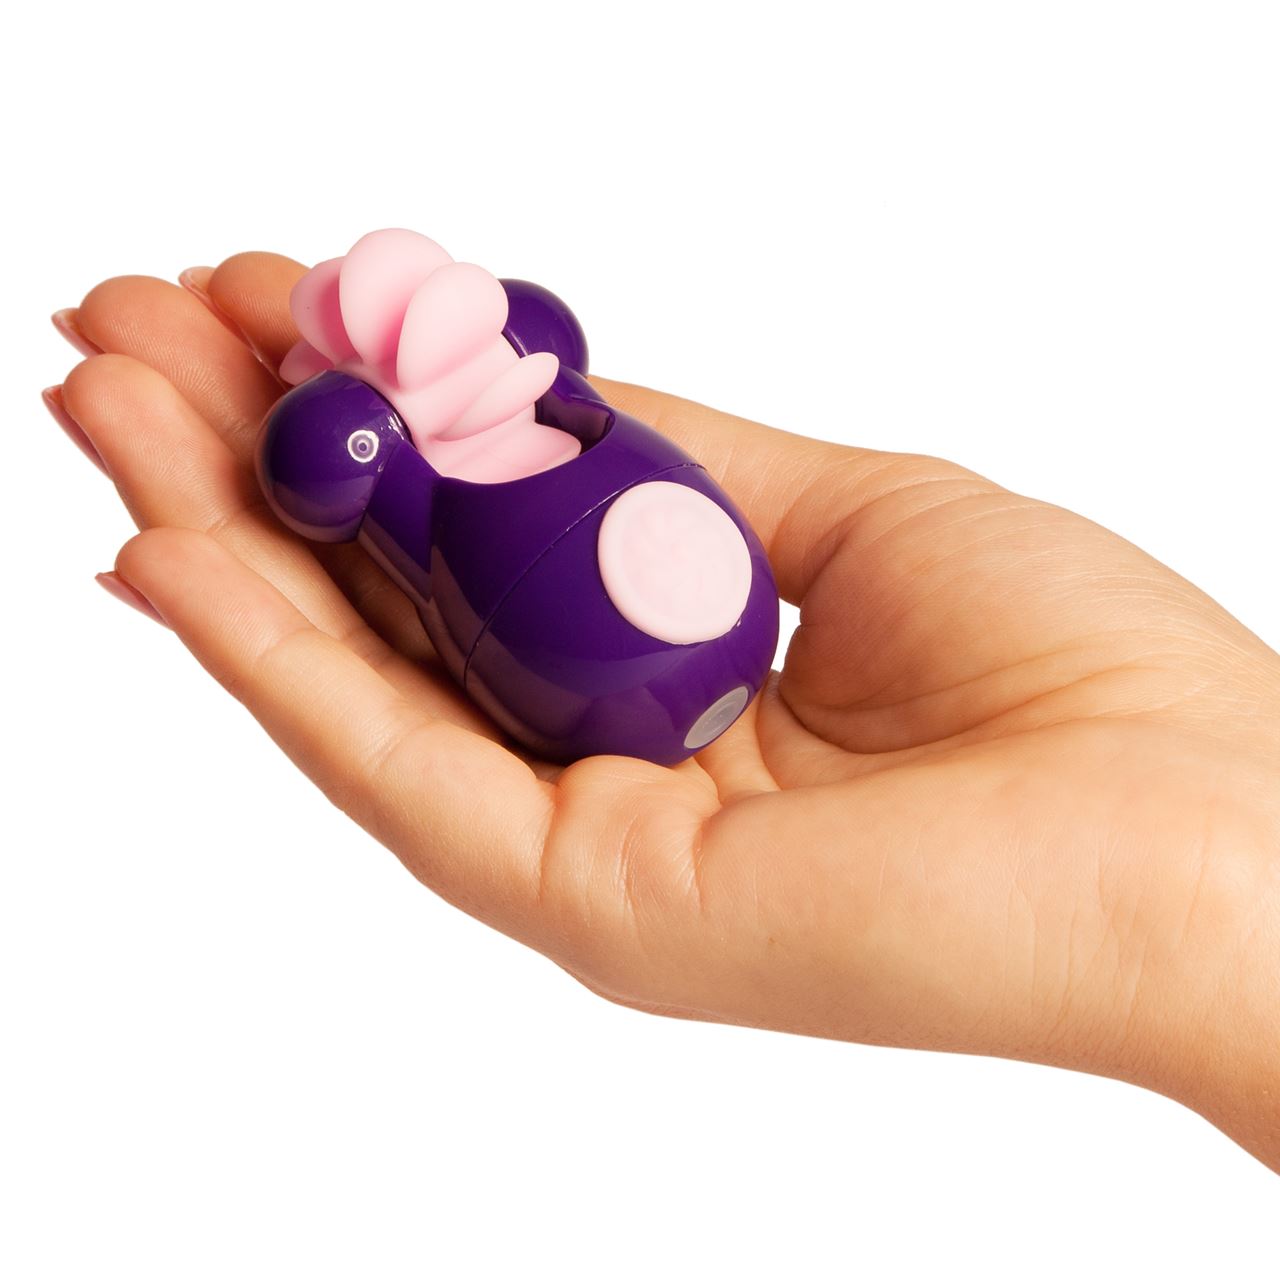 Sqweel Go USB Rechargeable Oral Sex Massager Purple - UABDSM